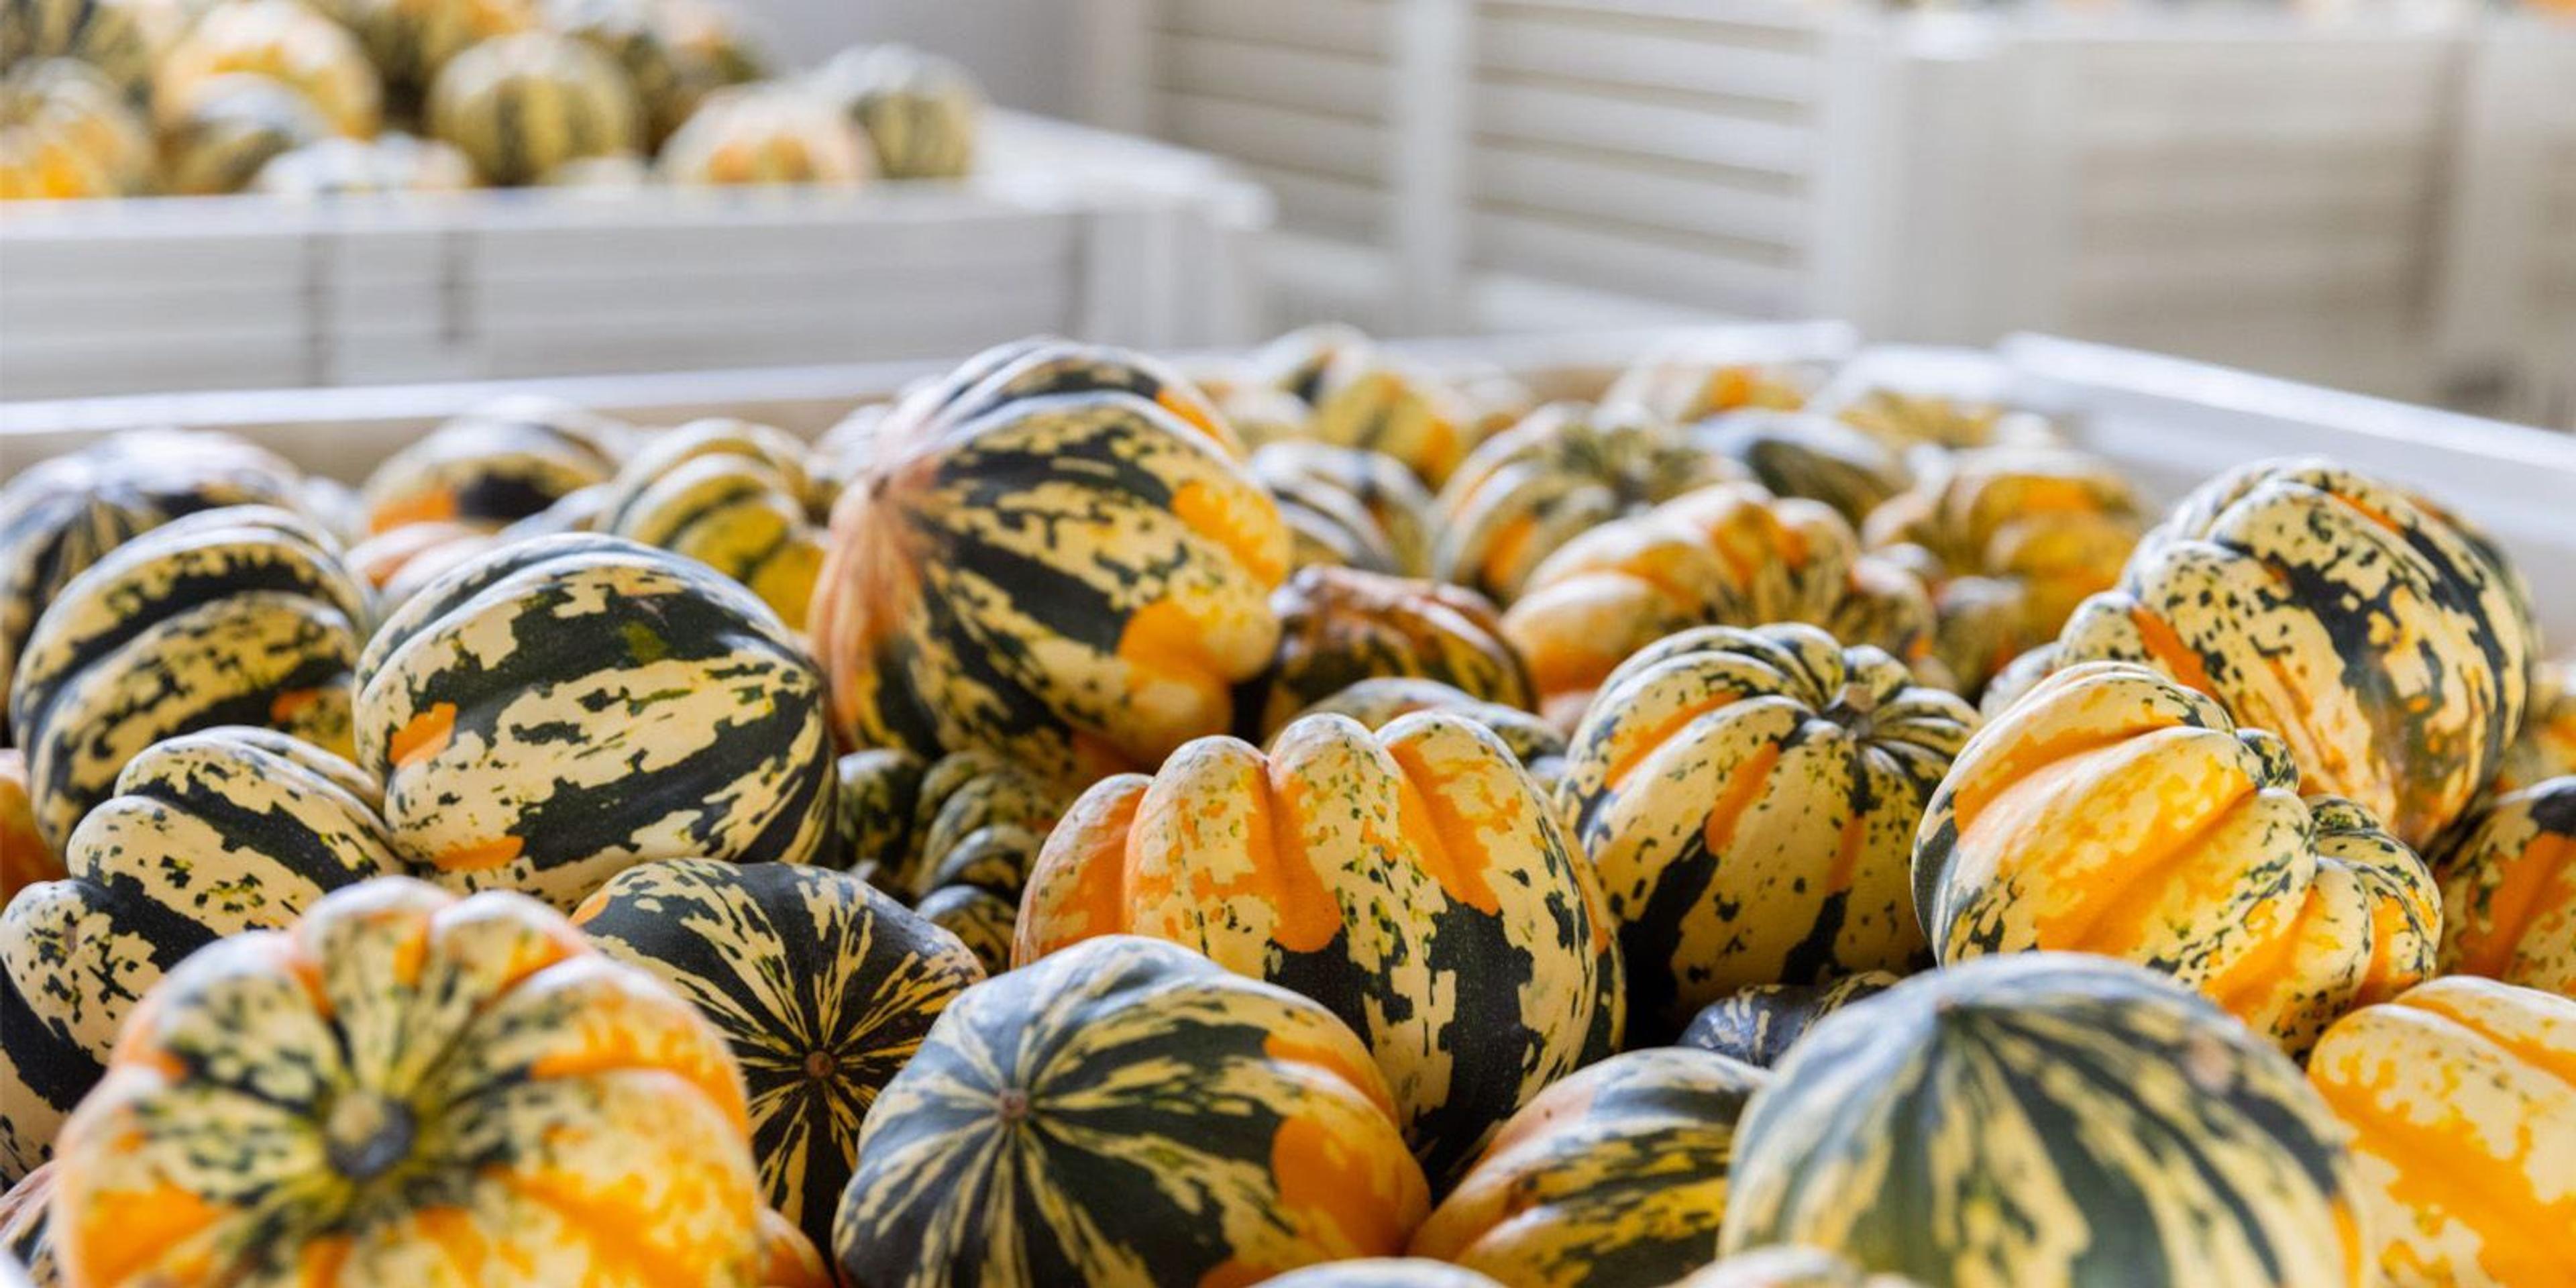 A bin of fresh carnival squash ready for delivery at an organic farm in Wisconsin.